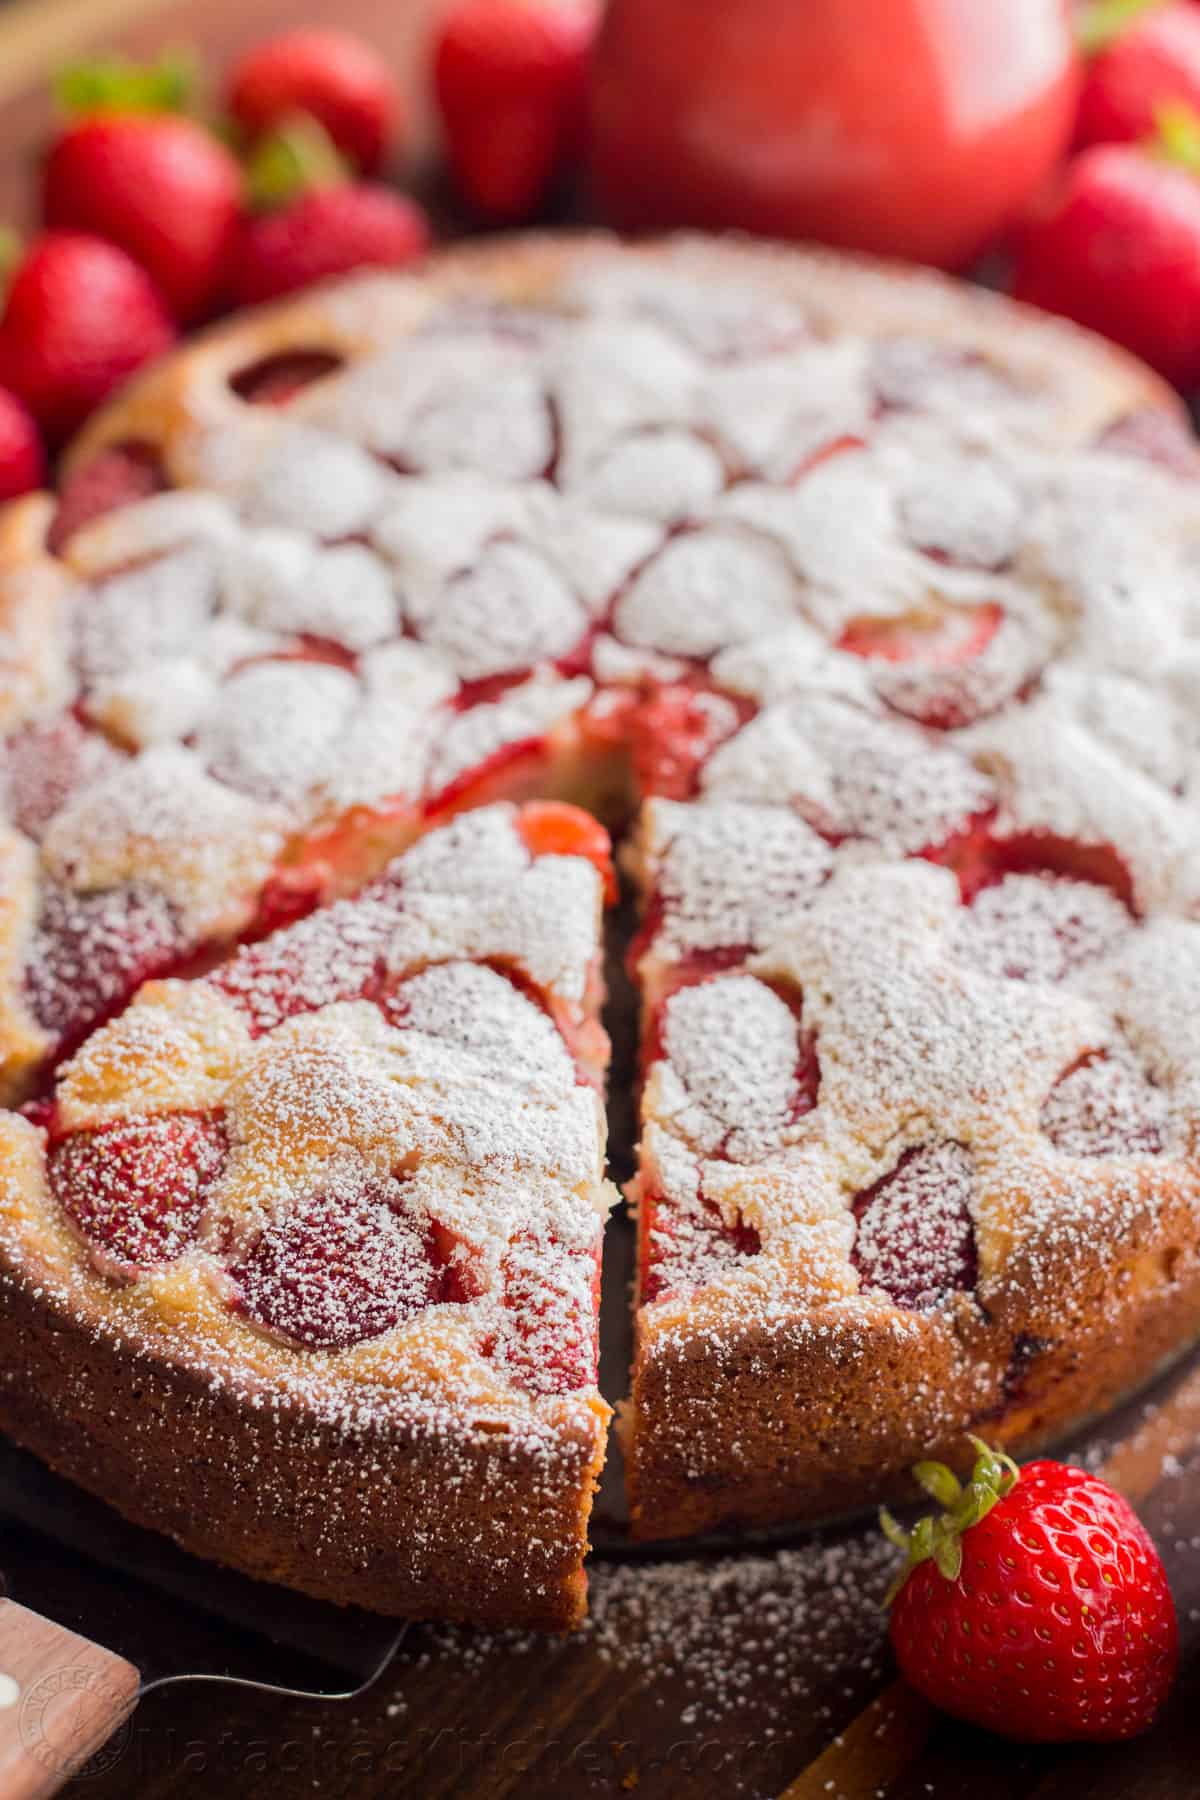 Strawberry cake dusted with powdered sugar